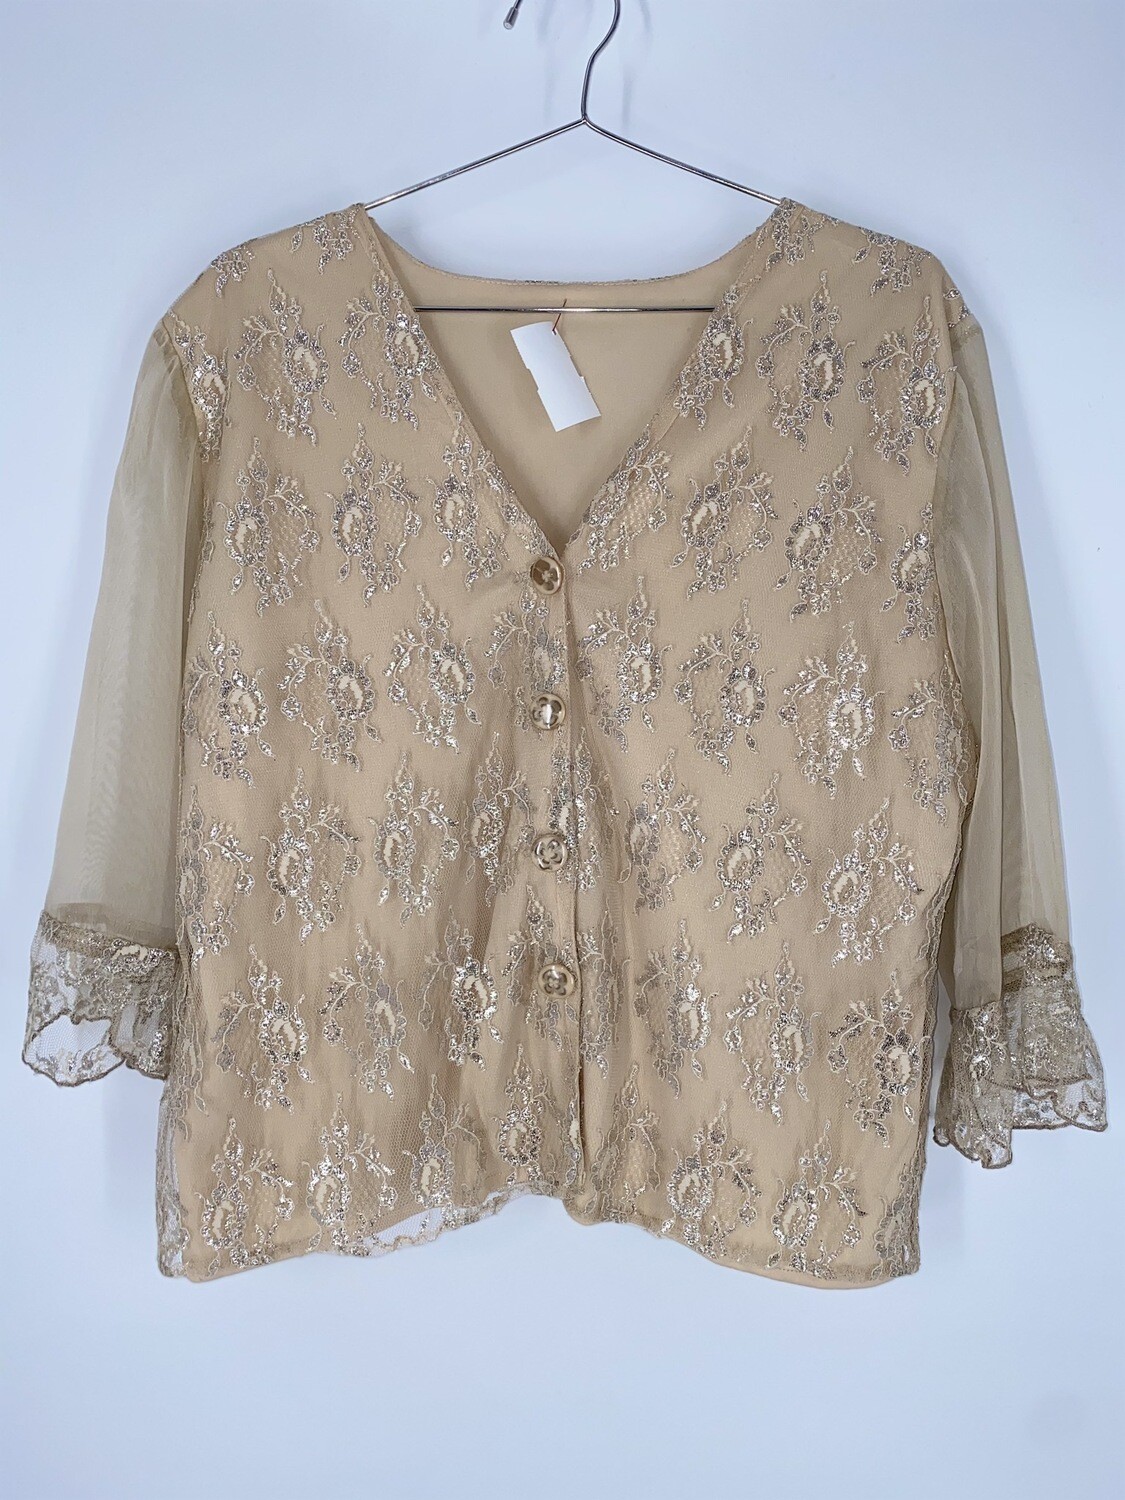 Gold And Cream Lace 3/4 Sleeve Top Size L